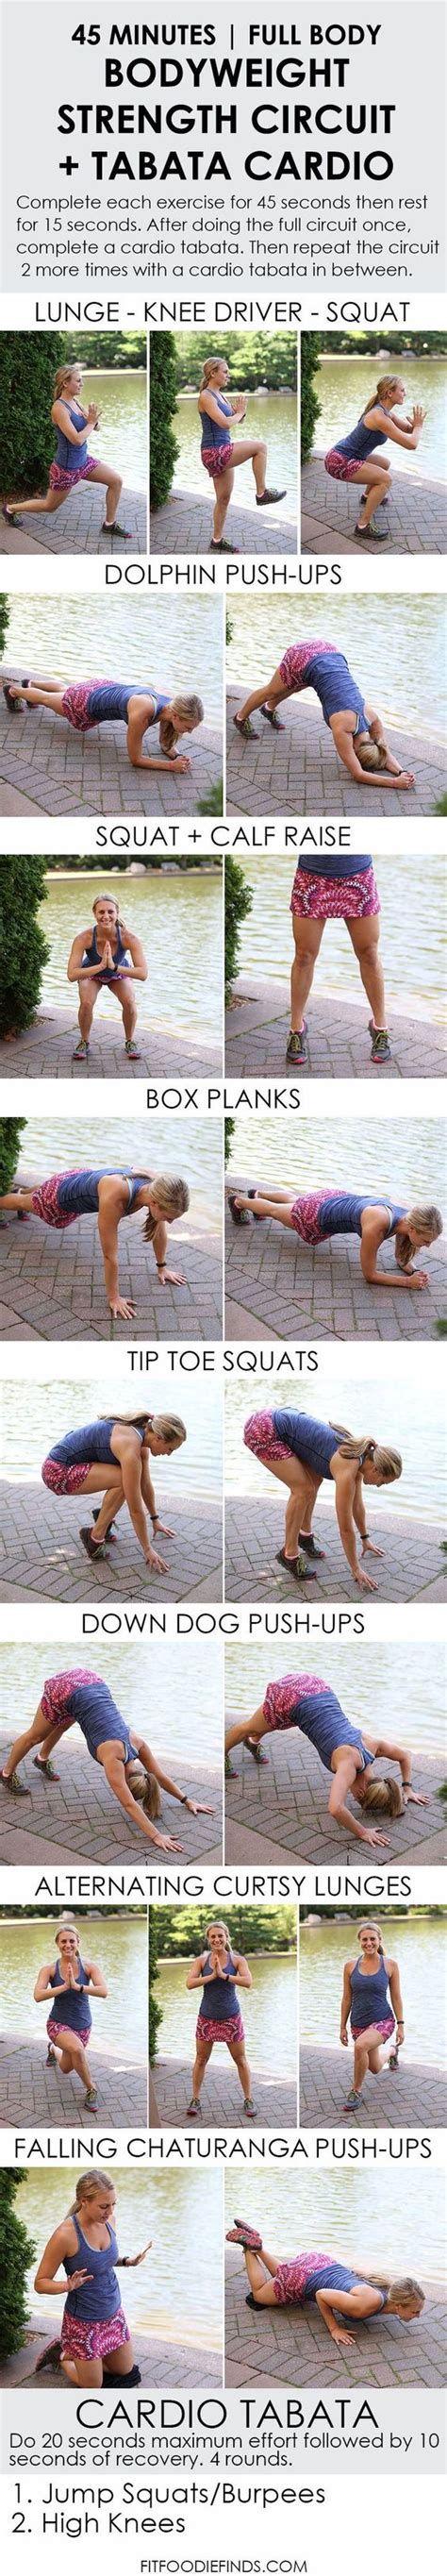 Tabata Cardio And Workout On Pinterest